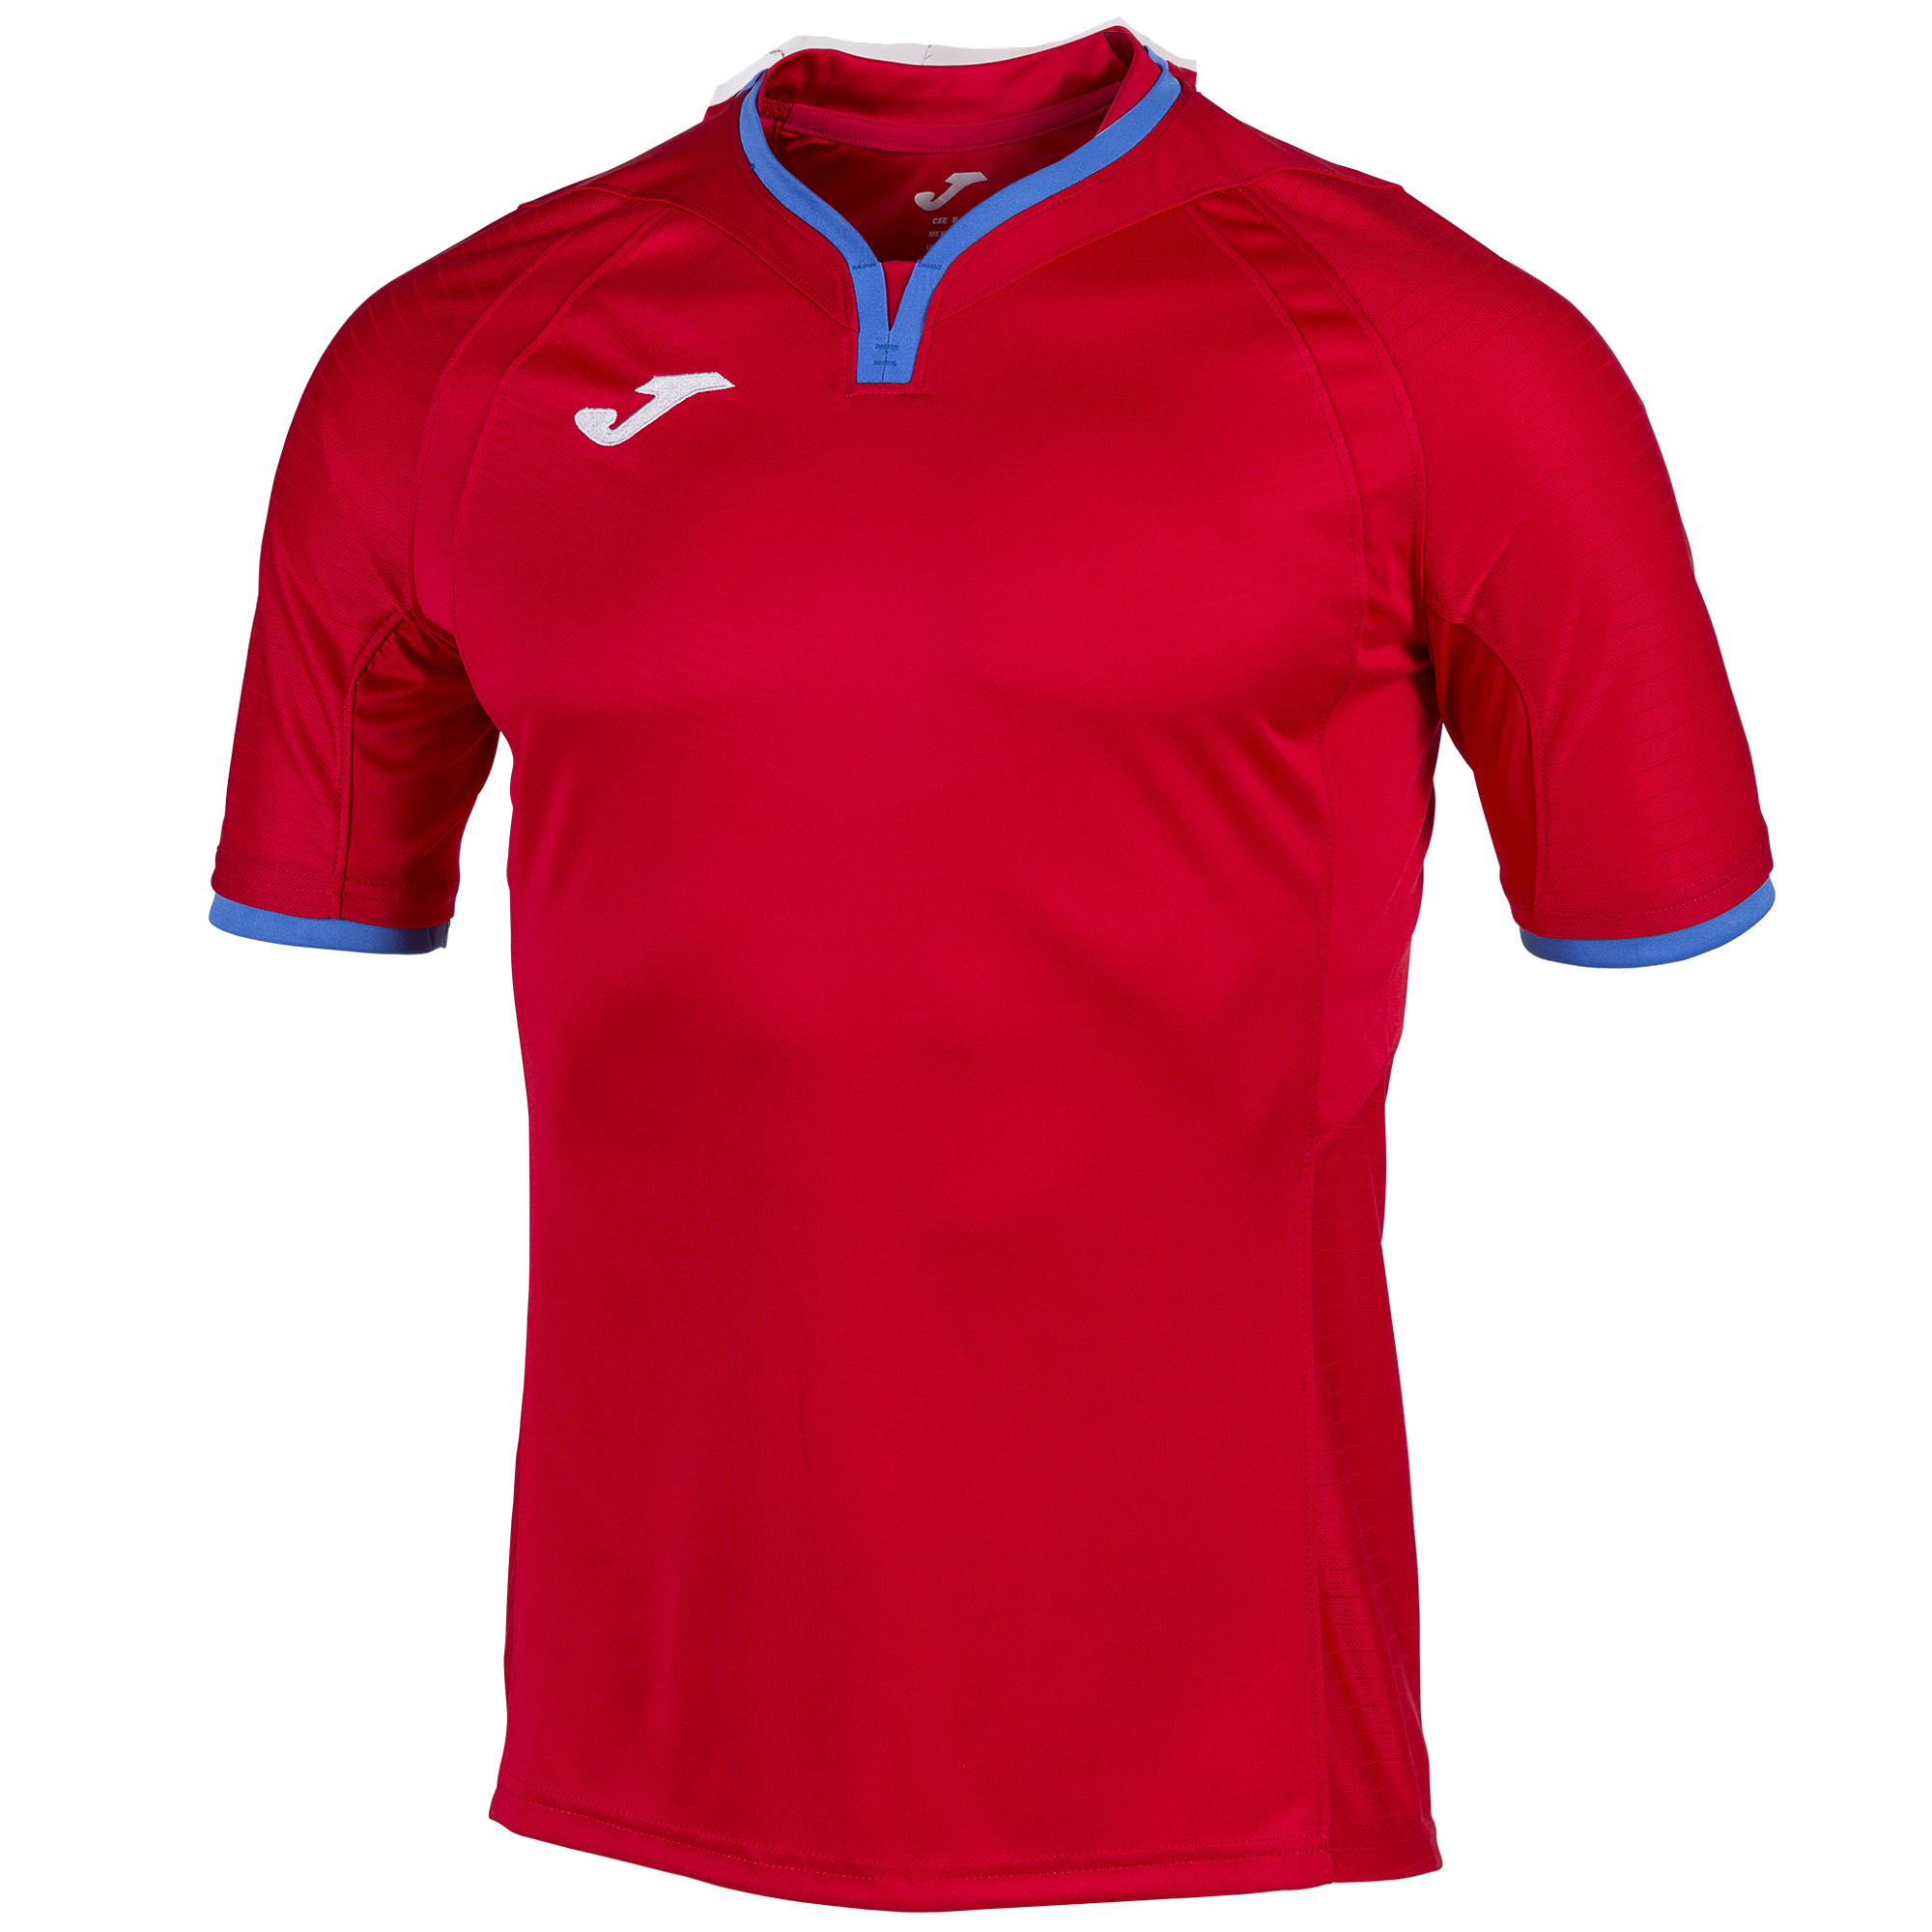 red and royal blue shirt